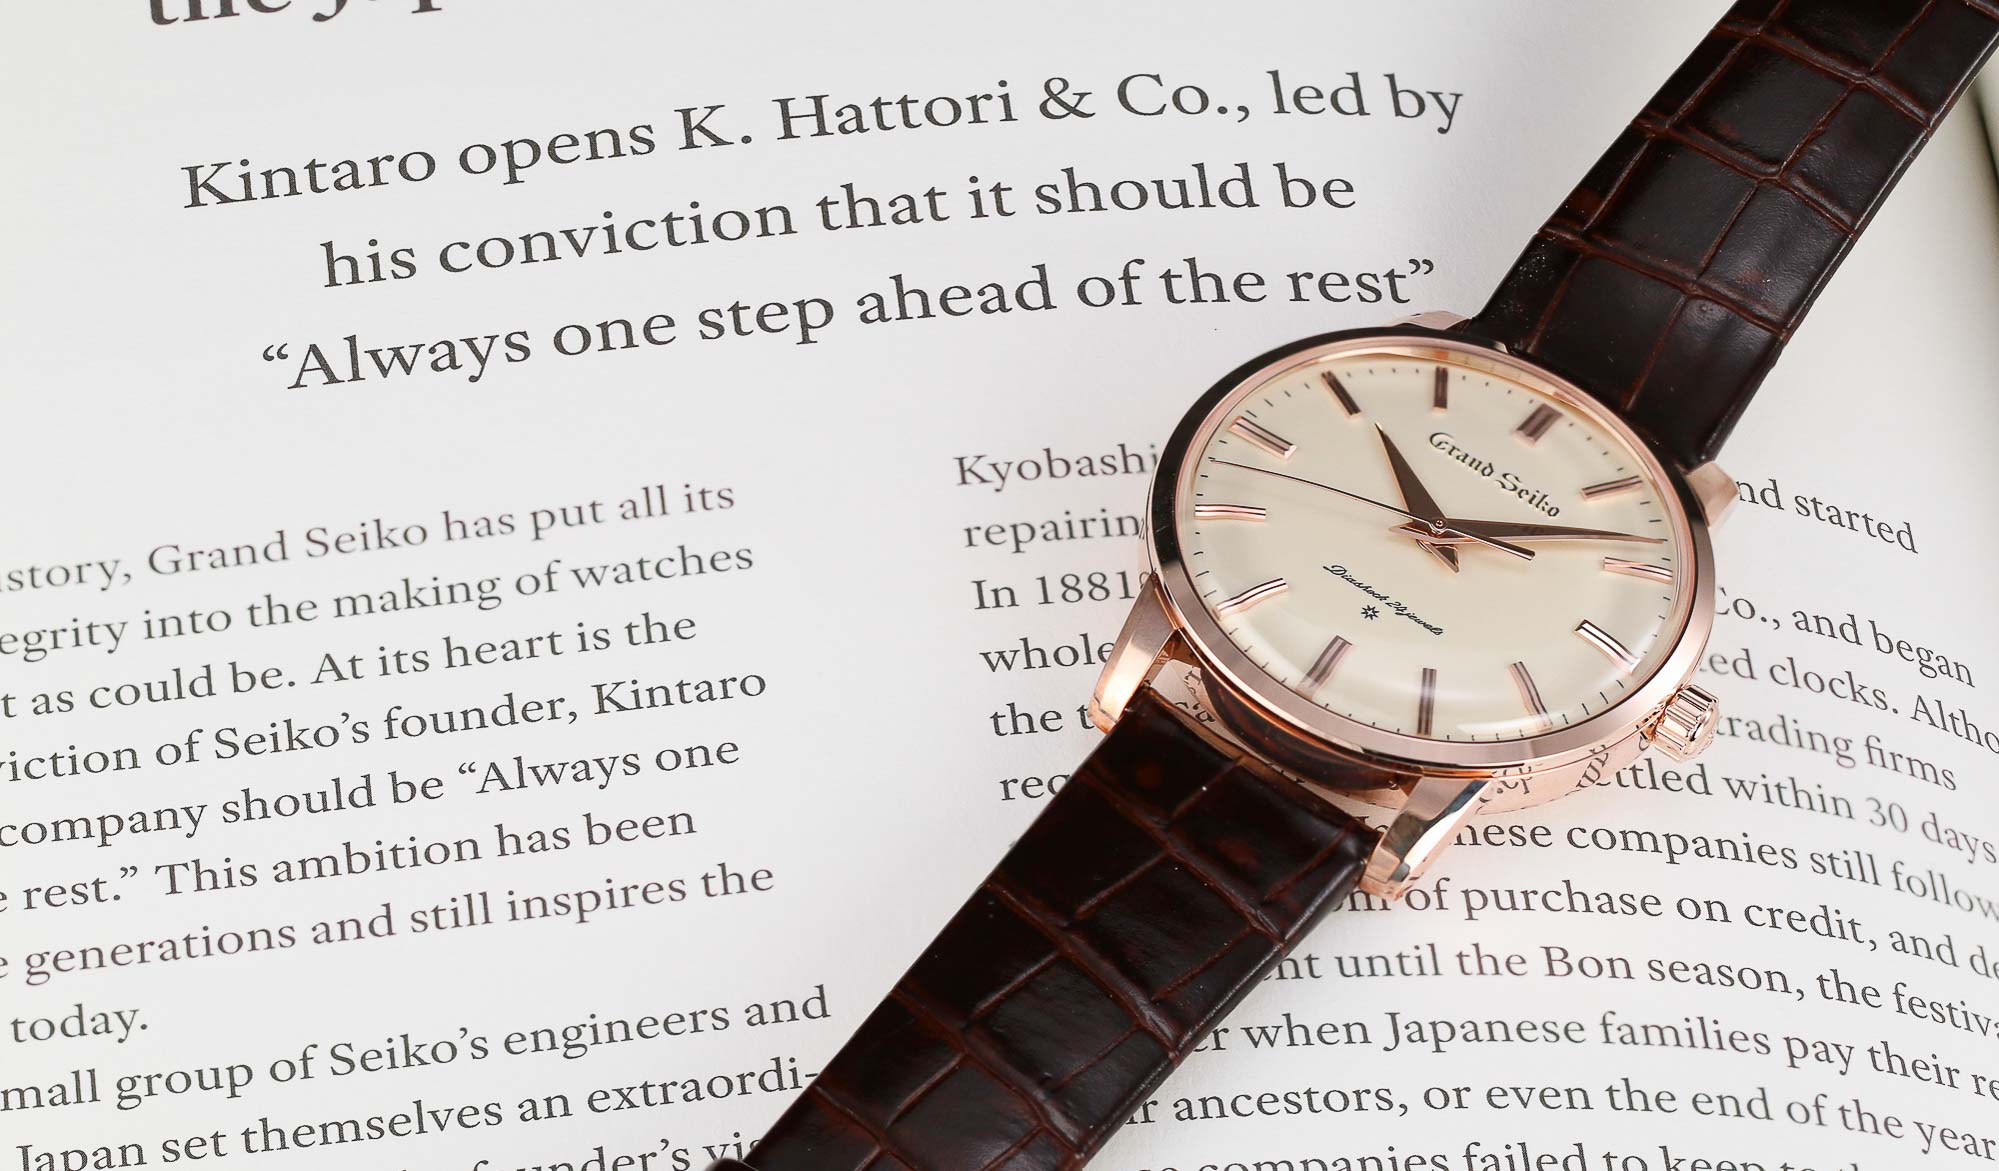 Grand Seiko SBGW260 golden dress watch laying on a book.